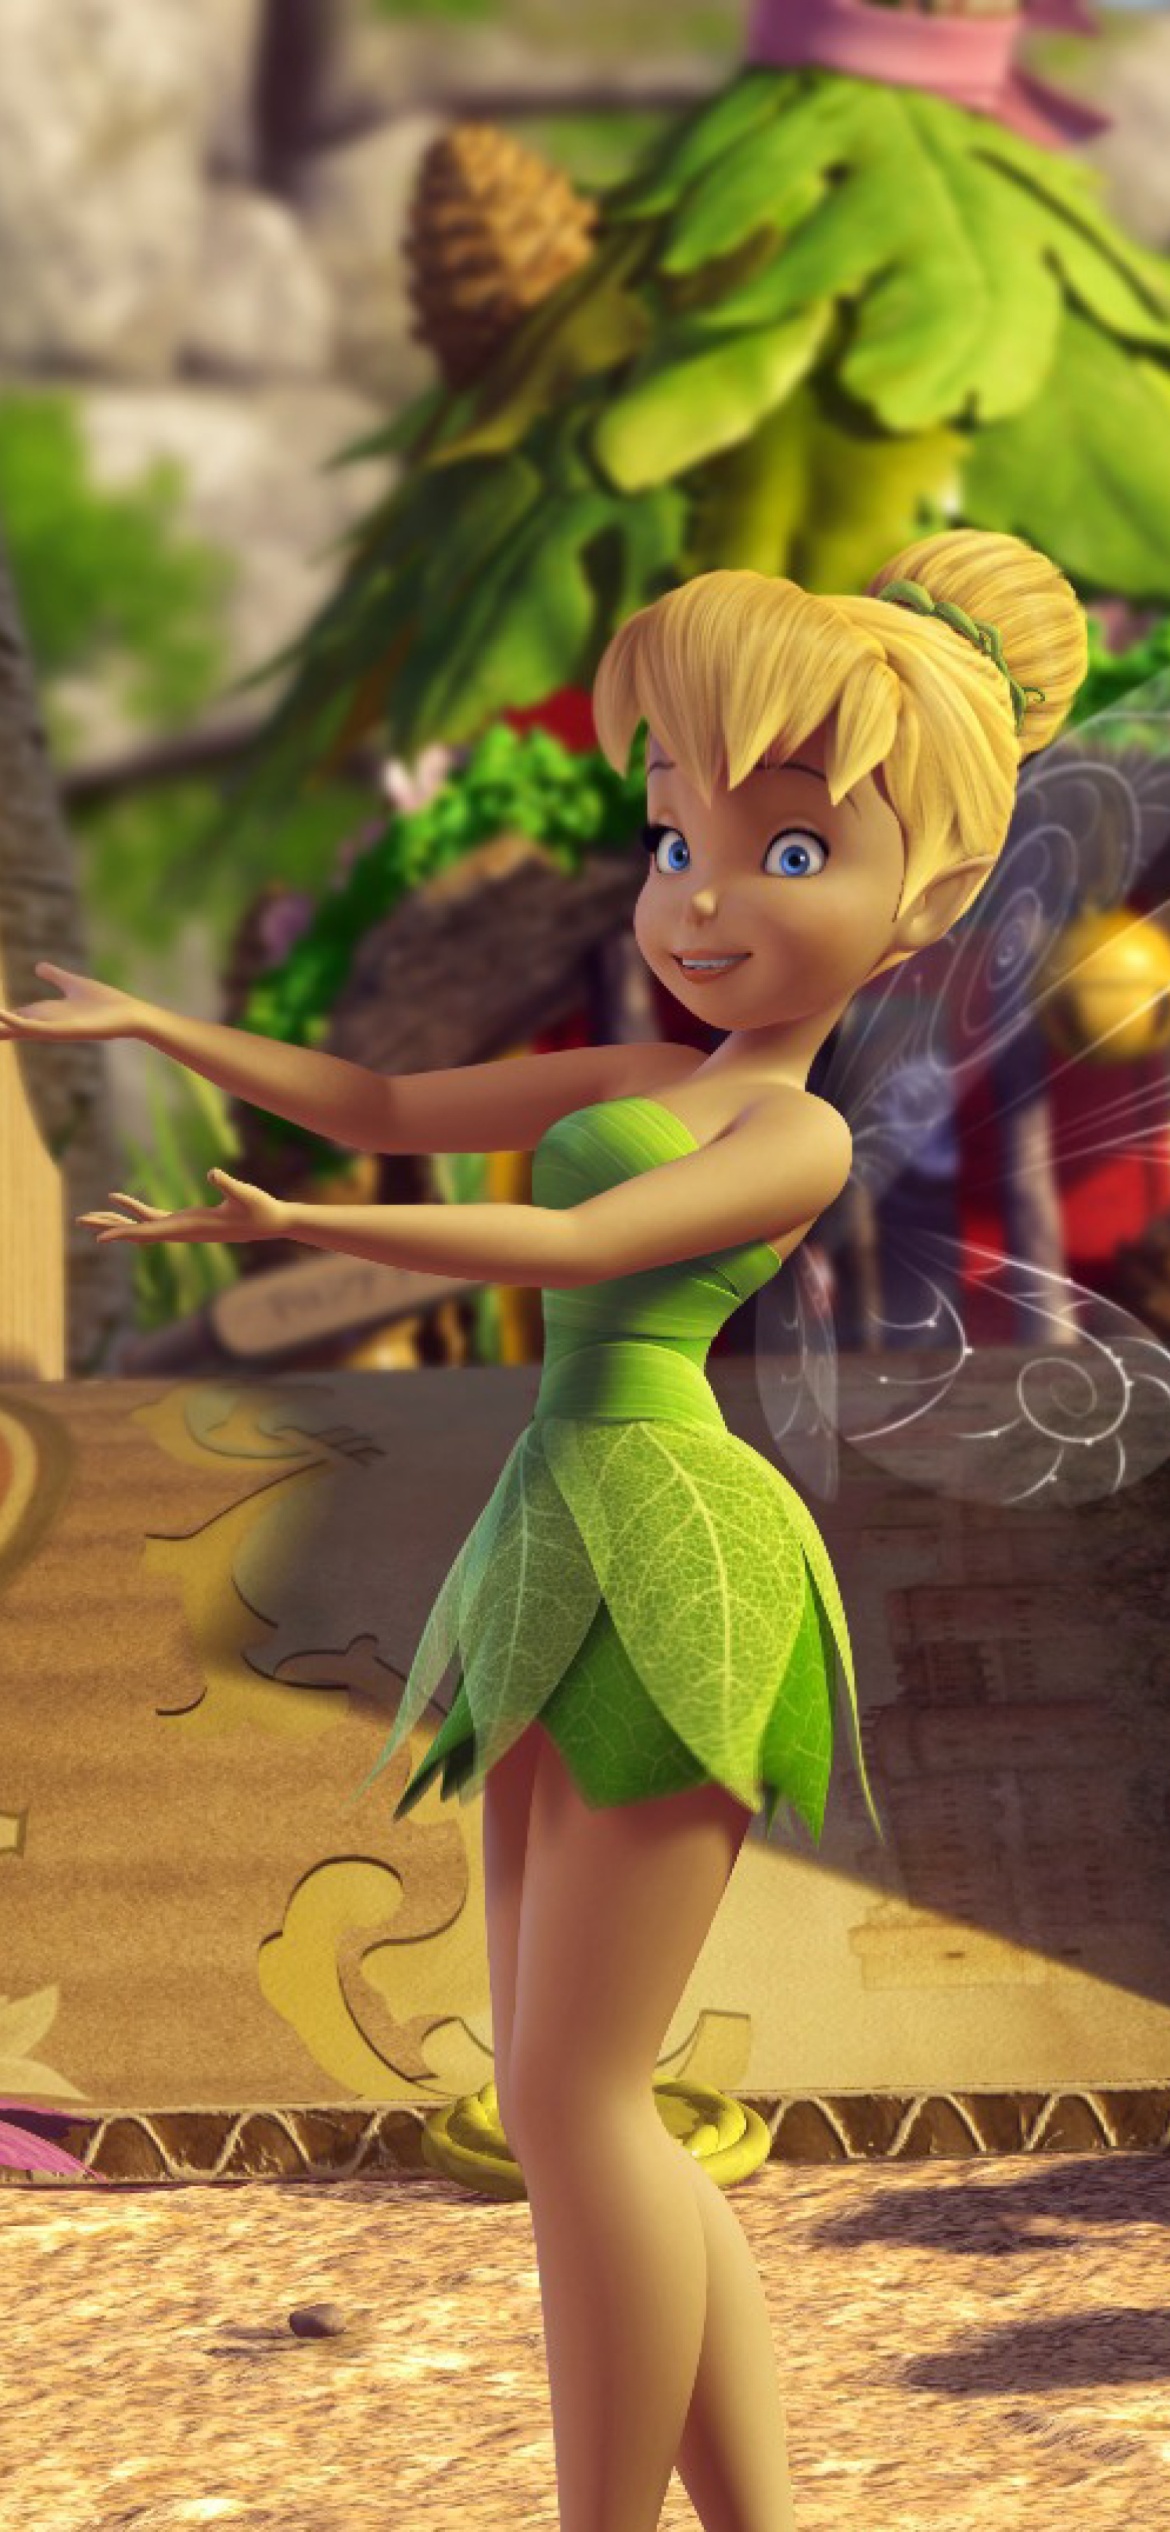 Tinker Bell And The Great Fairy Rescue 2 wallpaper 1170x2532